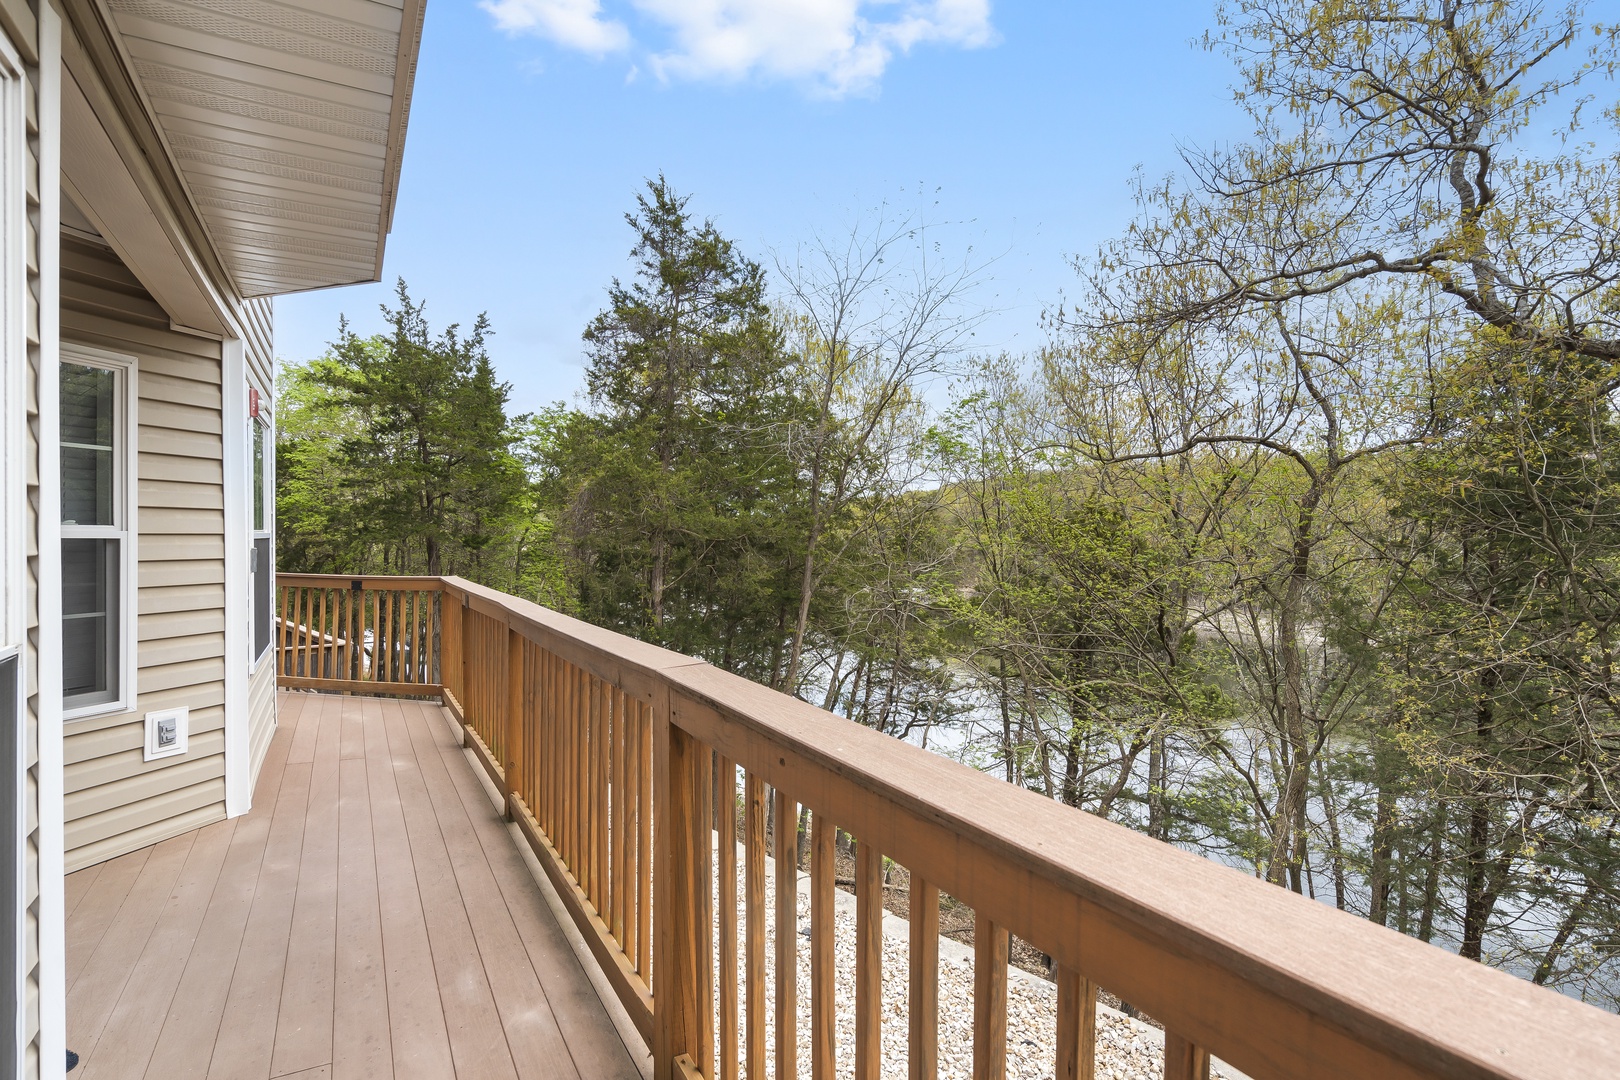 Lake view from the front entrance deck